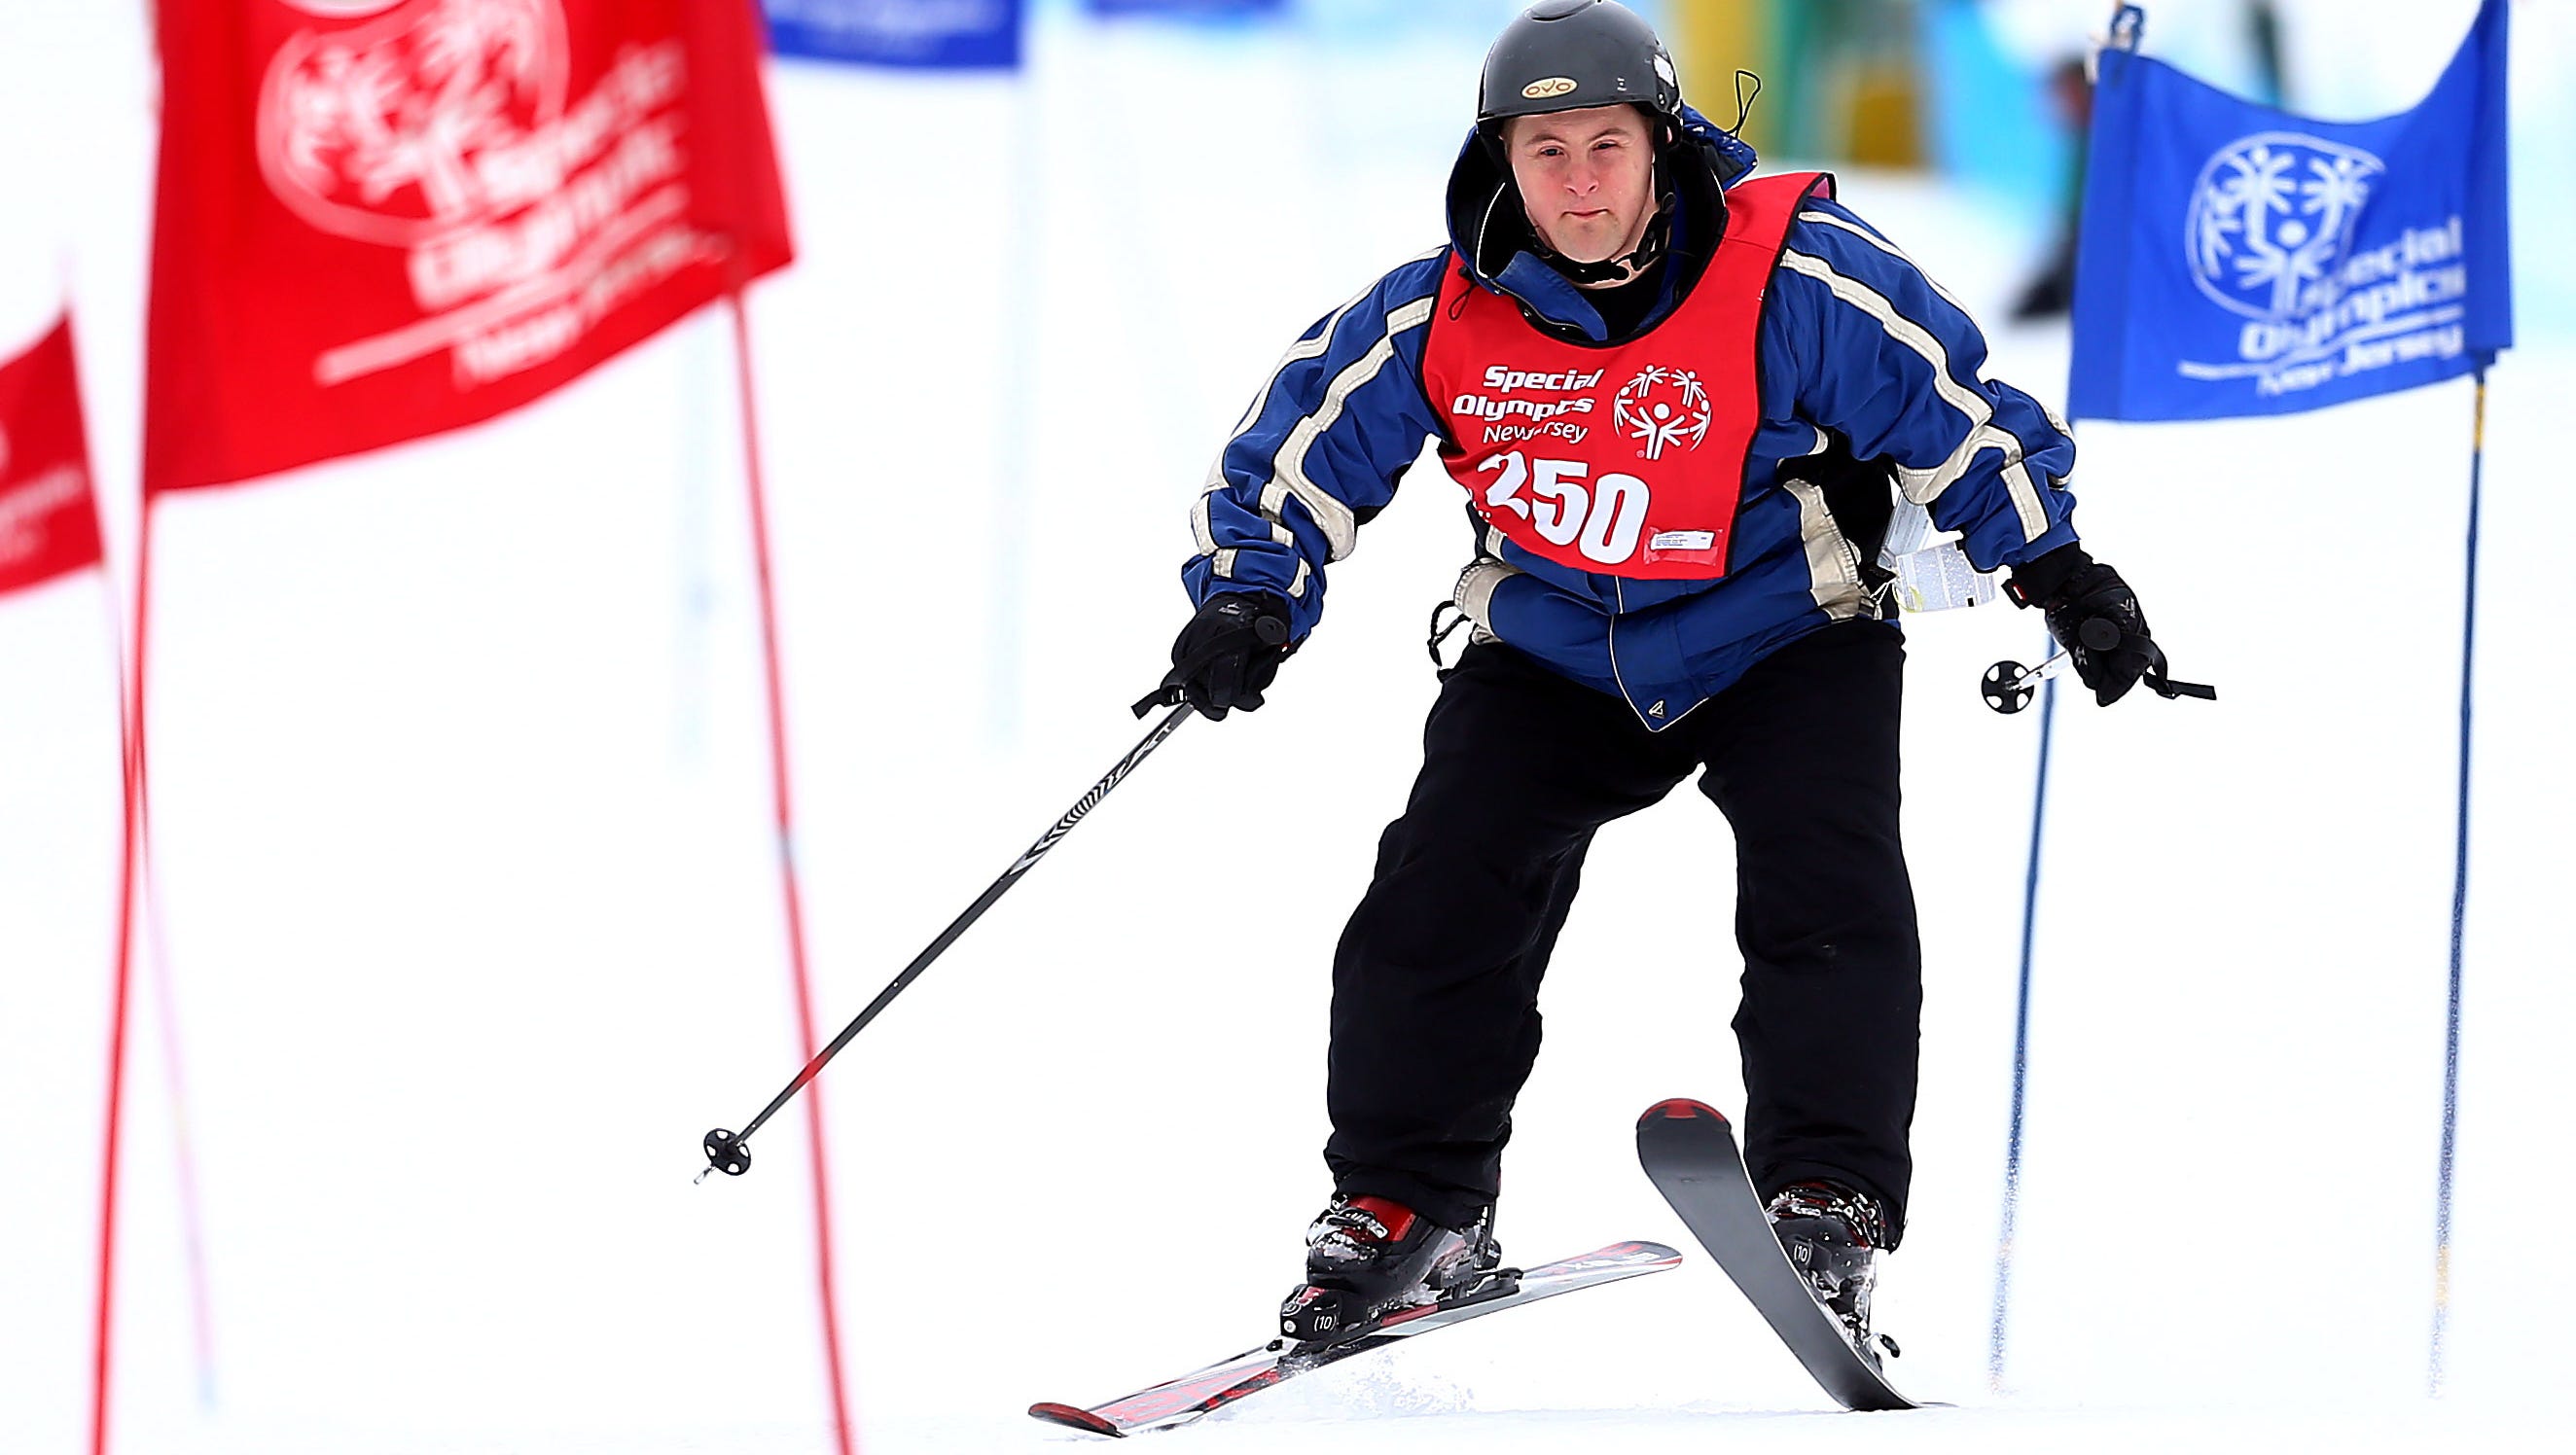 Special Olympics New Jersey athletes go for the gold at Winter Games